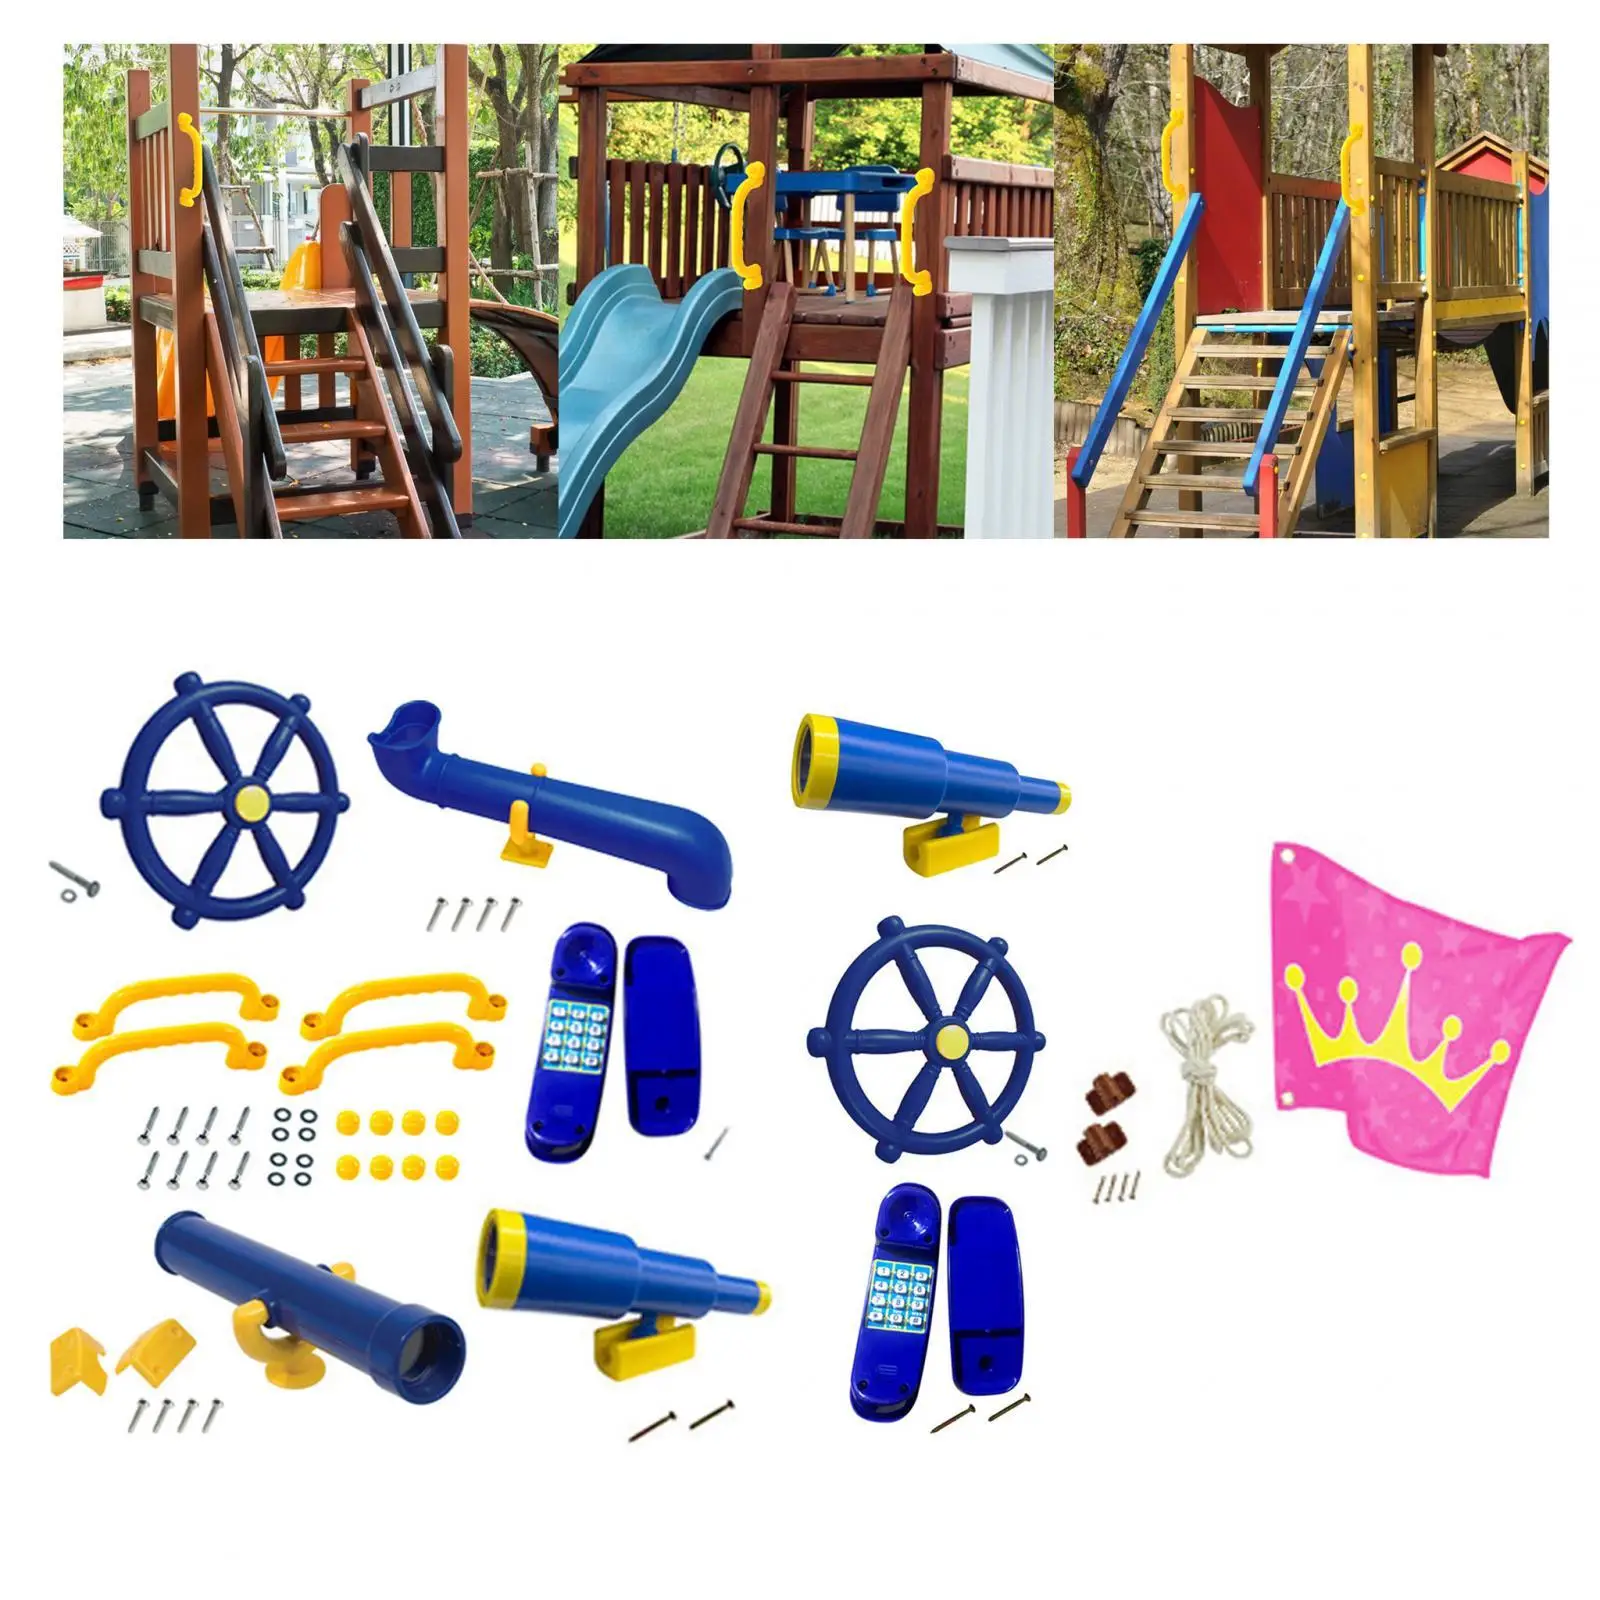 Playground Accessories Steering Wheel Pirate Ship Parts Swingset Attachments for Backyard Outdoor Treehouse Play House Swingset